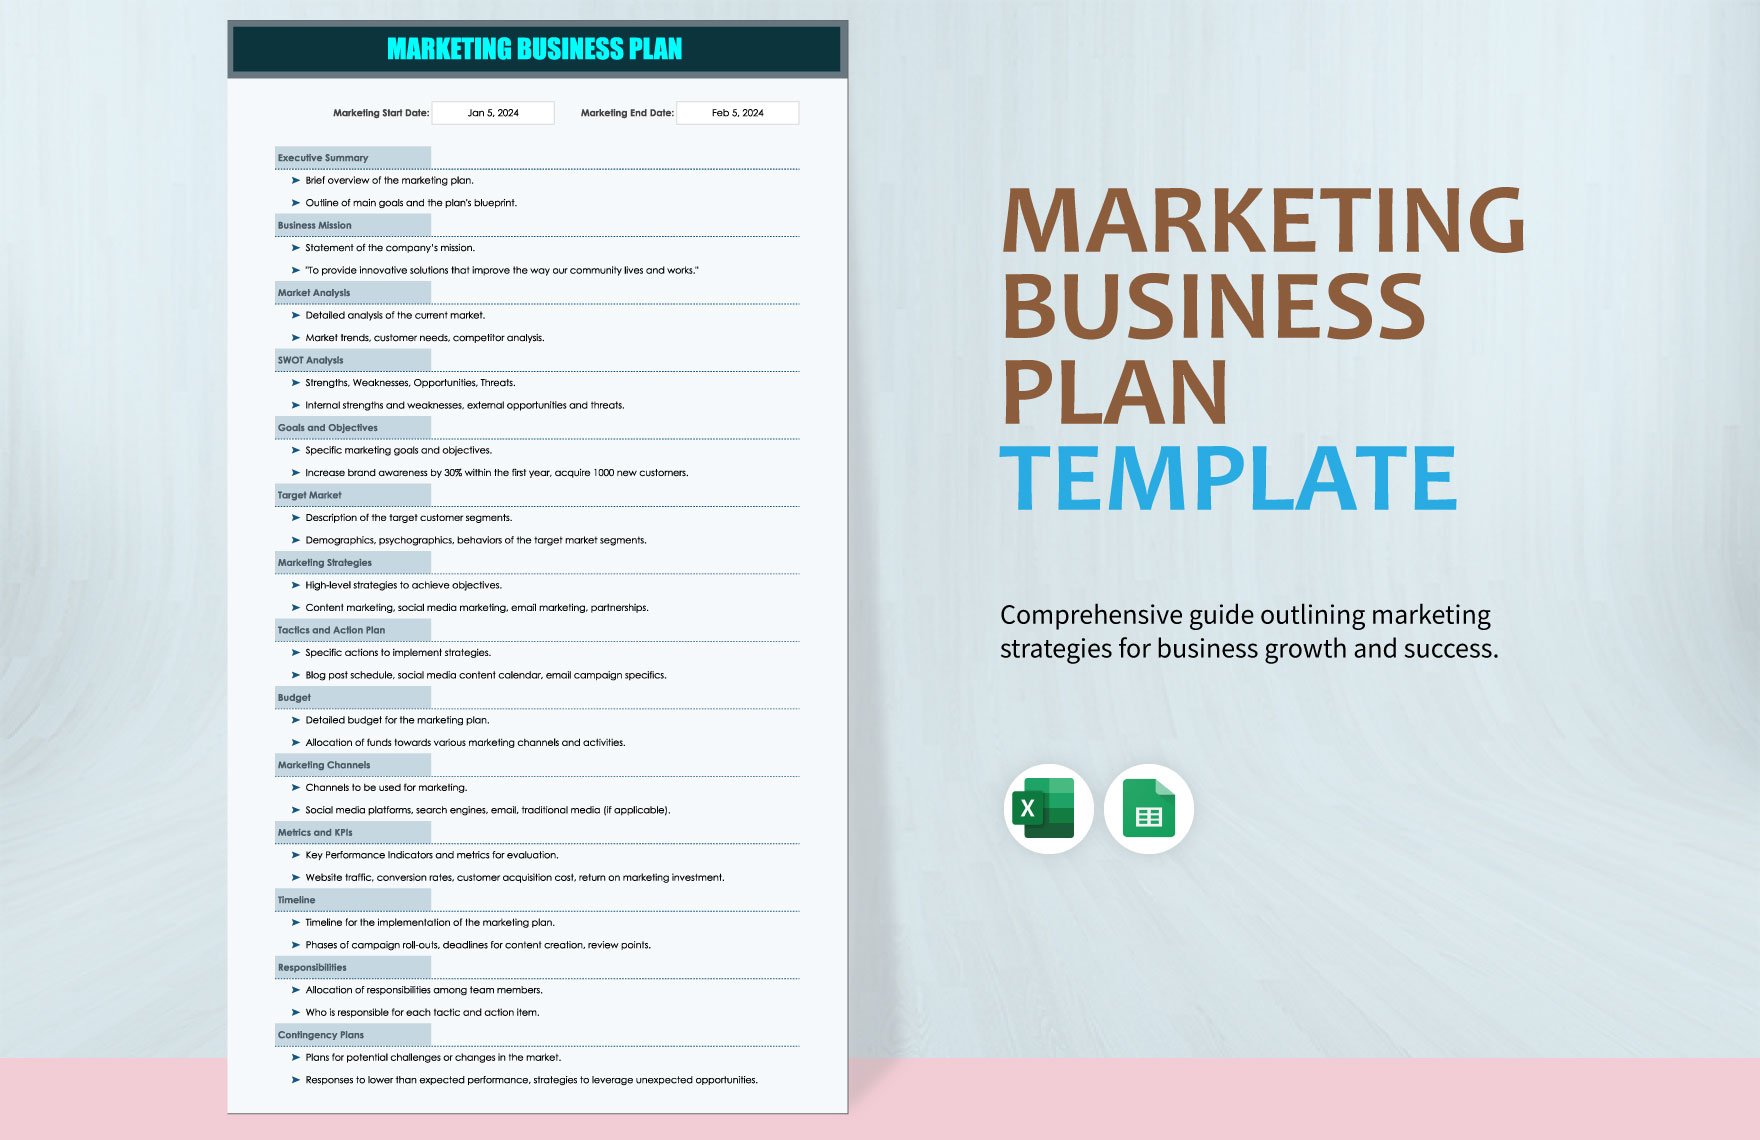 Marketing Business Plan Template in Excel, Google Sheets